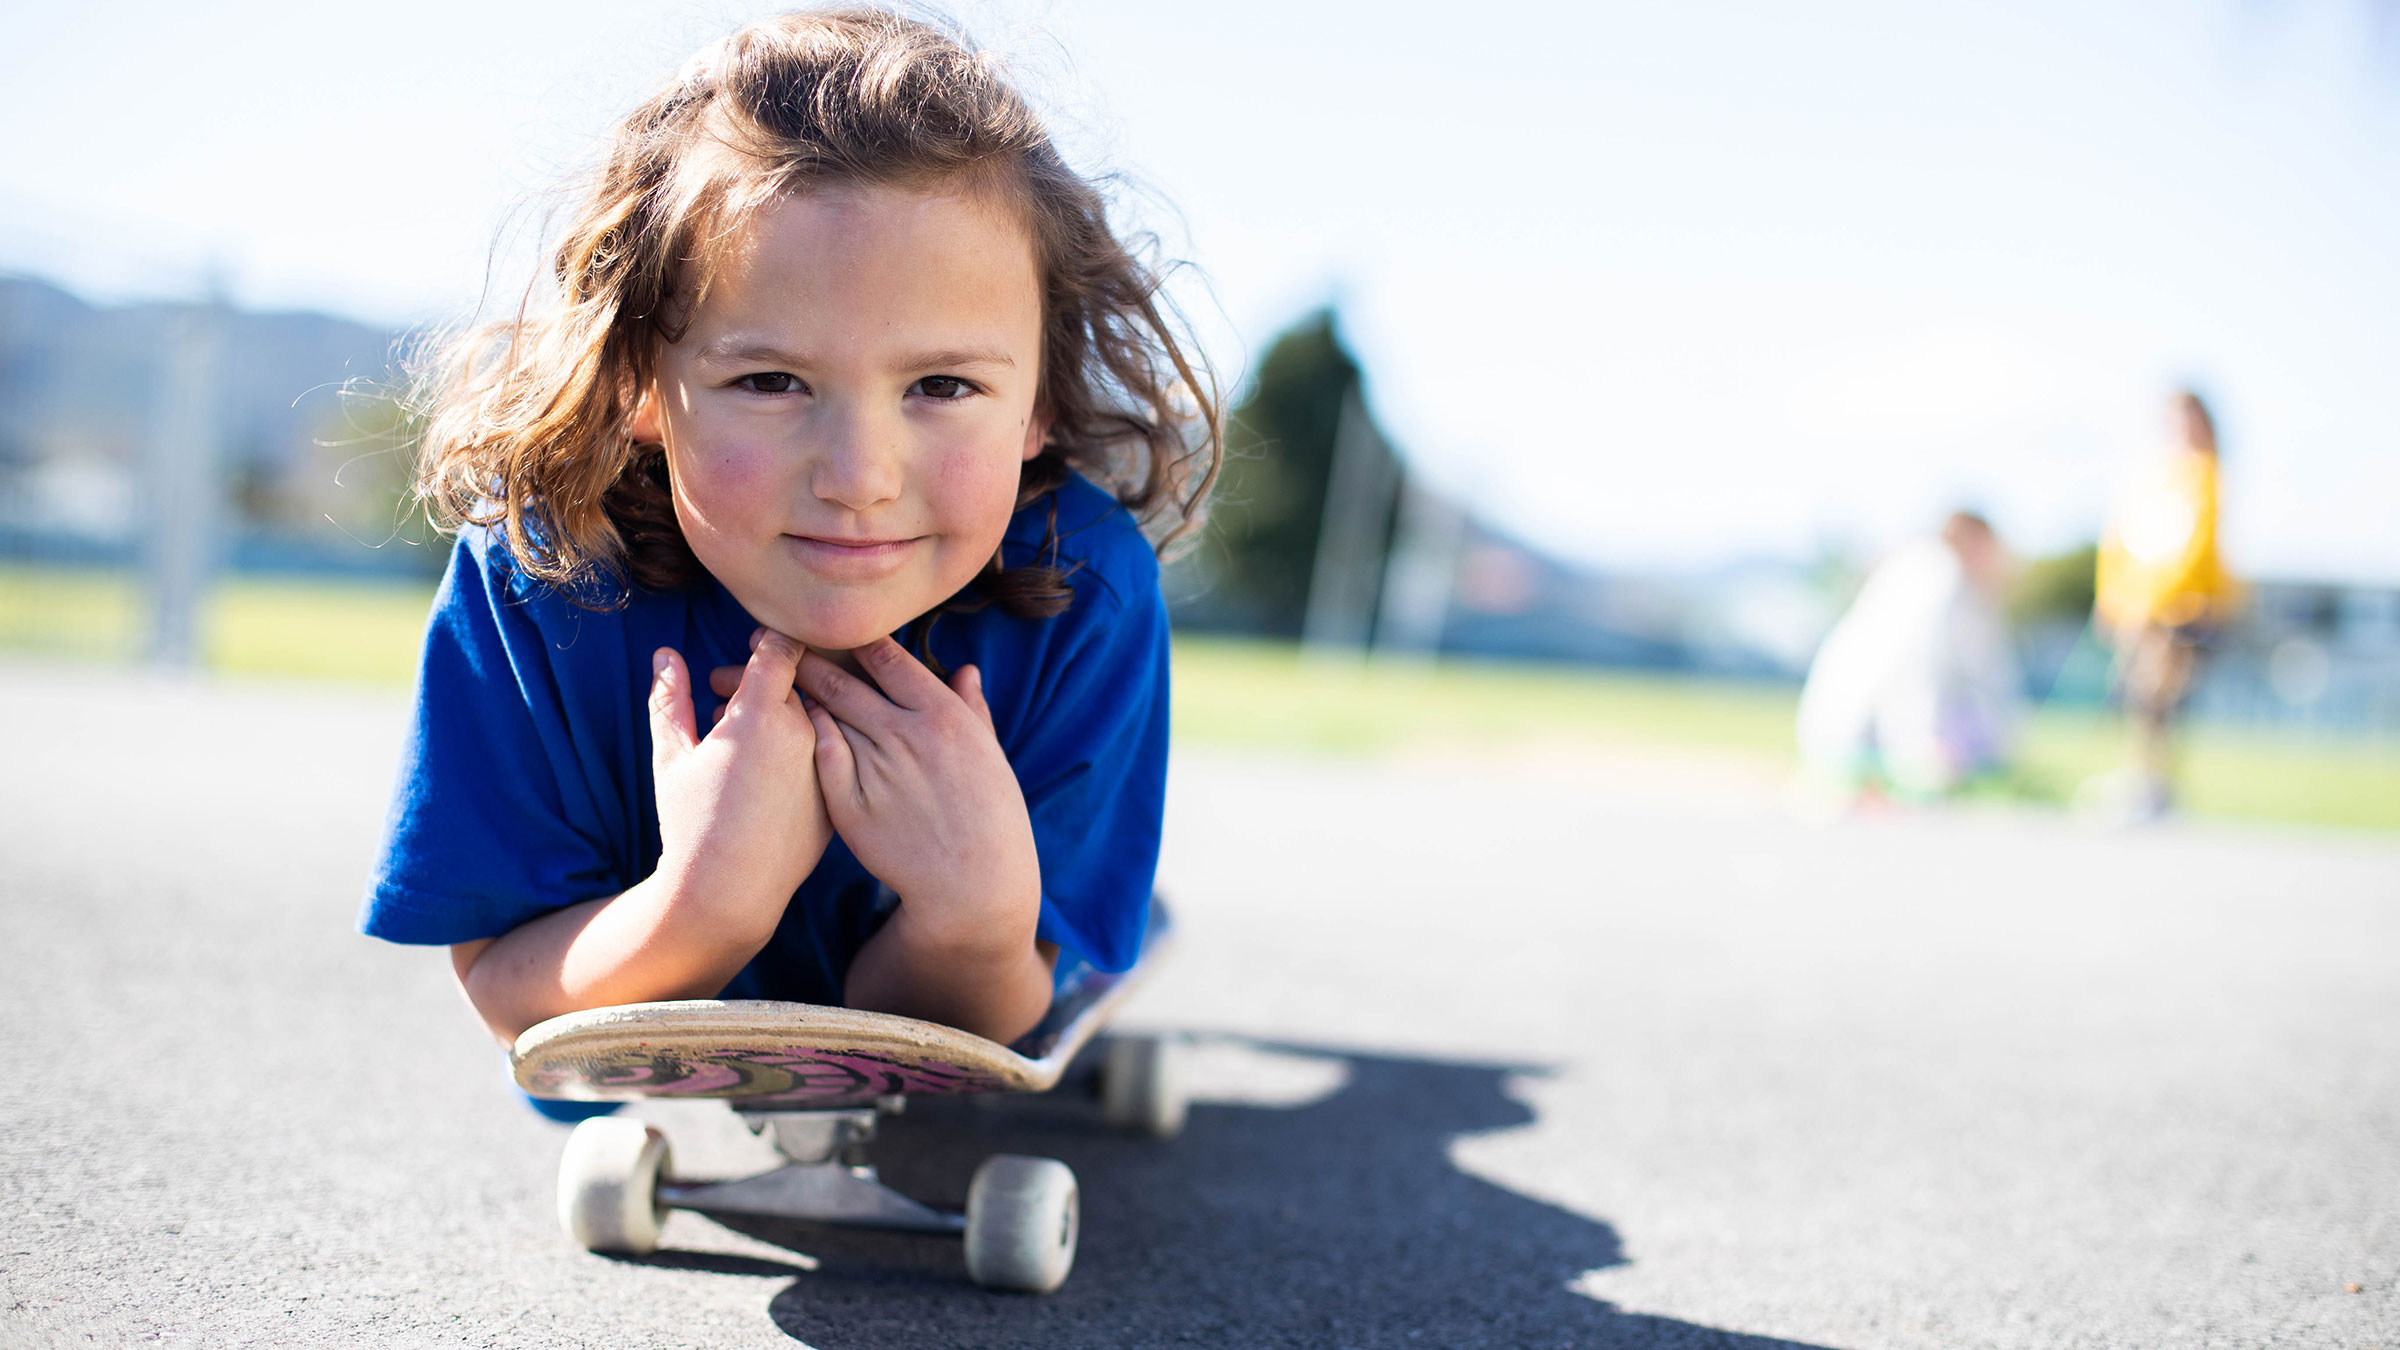 A student outdoors, lying on a skateboard and smiling